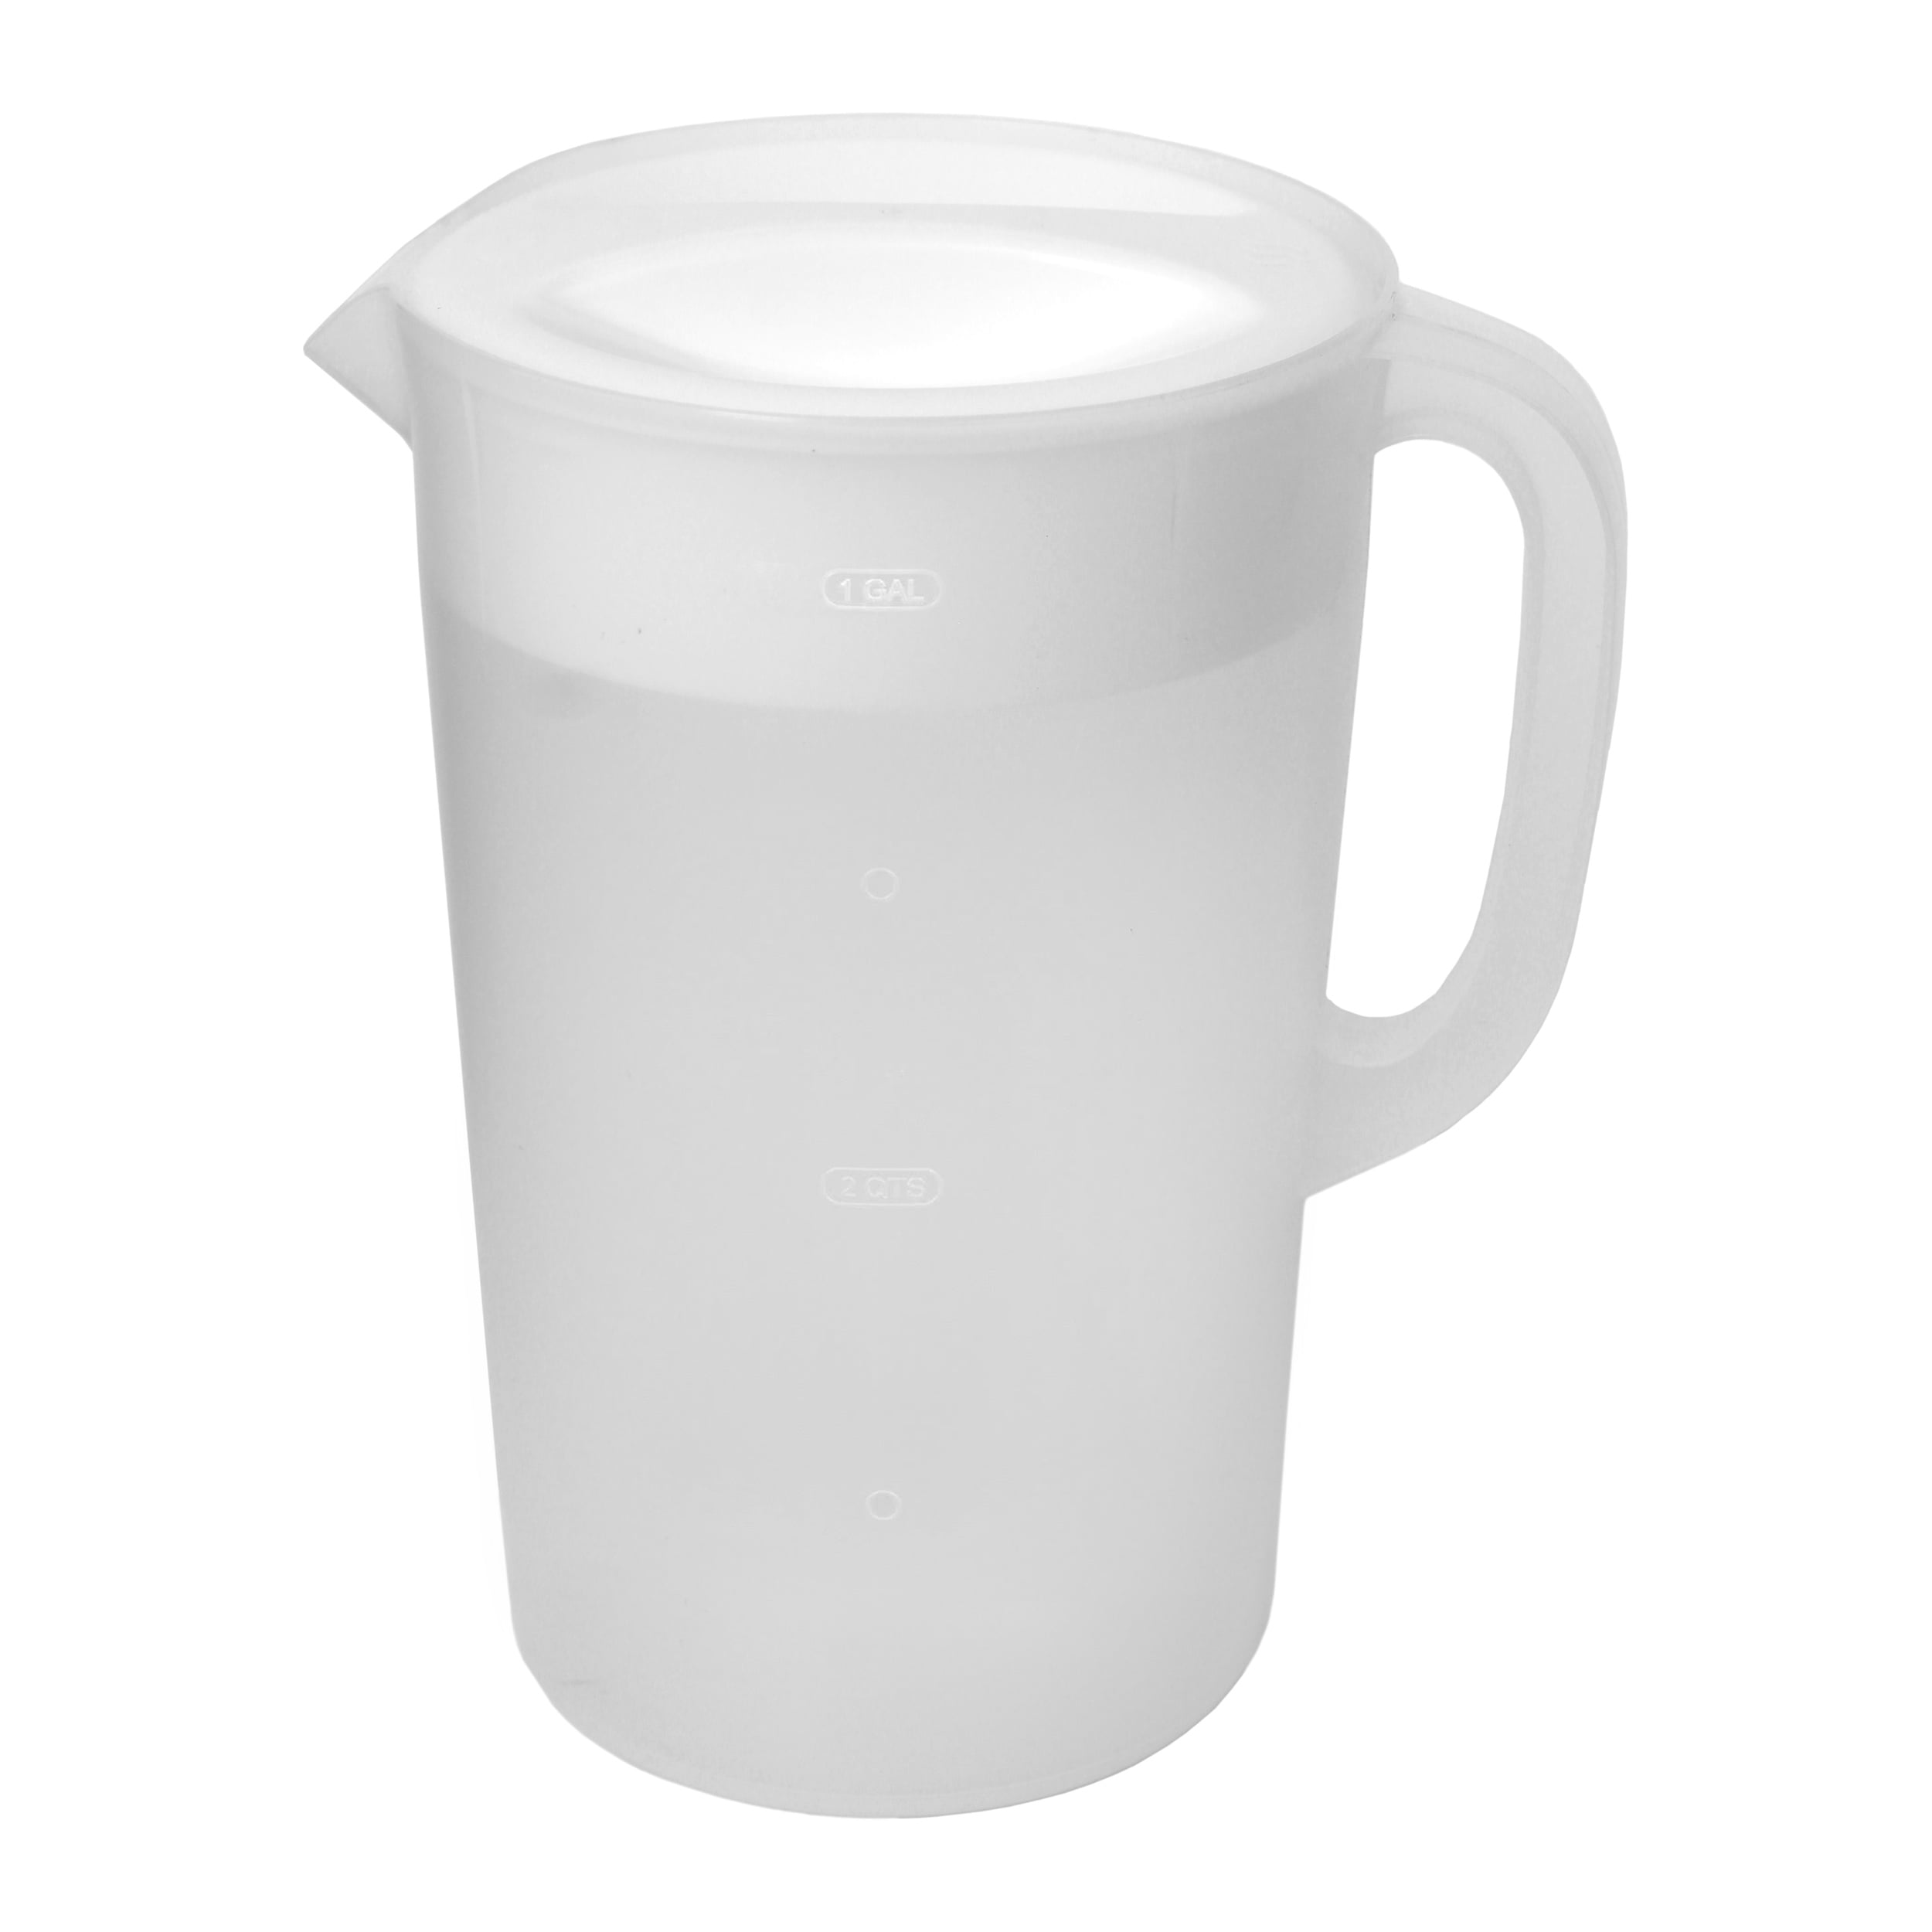 The Rubbermaid 1-gallon pitcher: holding a lifetime of Tang, lemonade, and  ice tea. : r/BuyItForLife